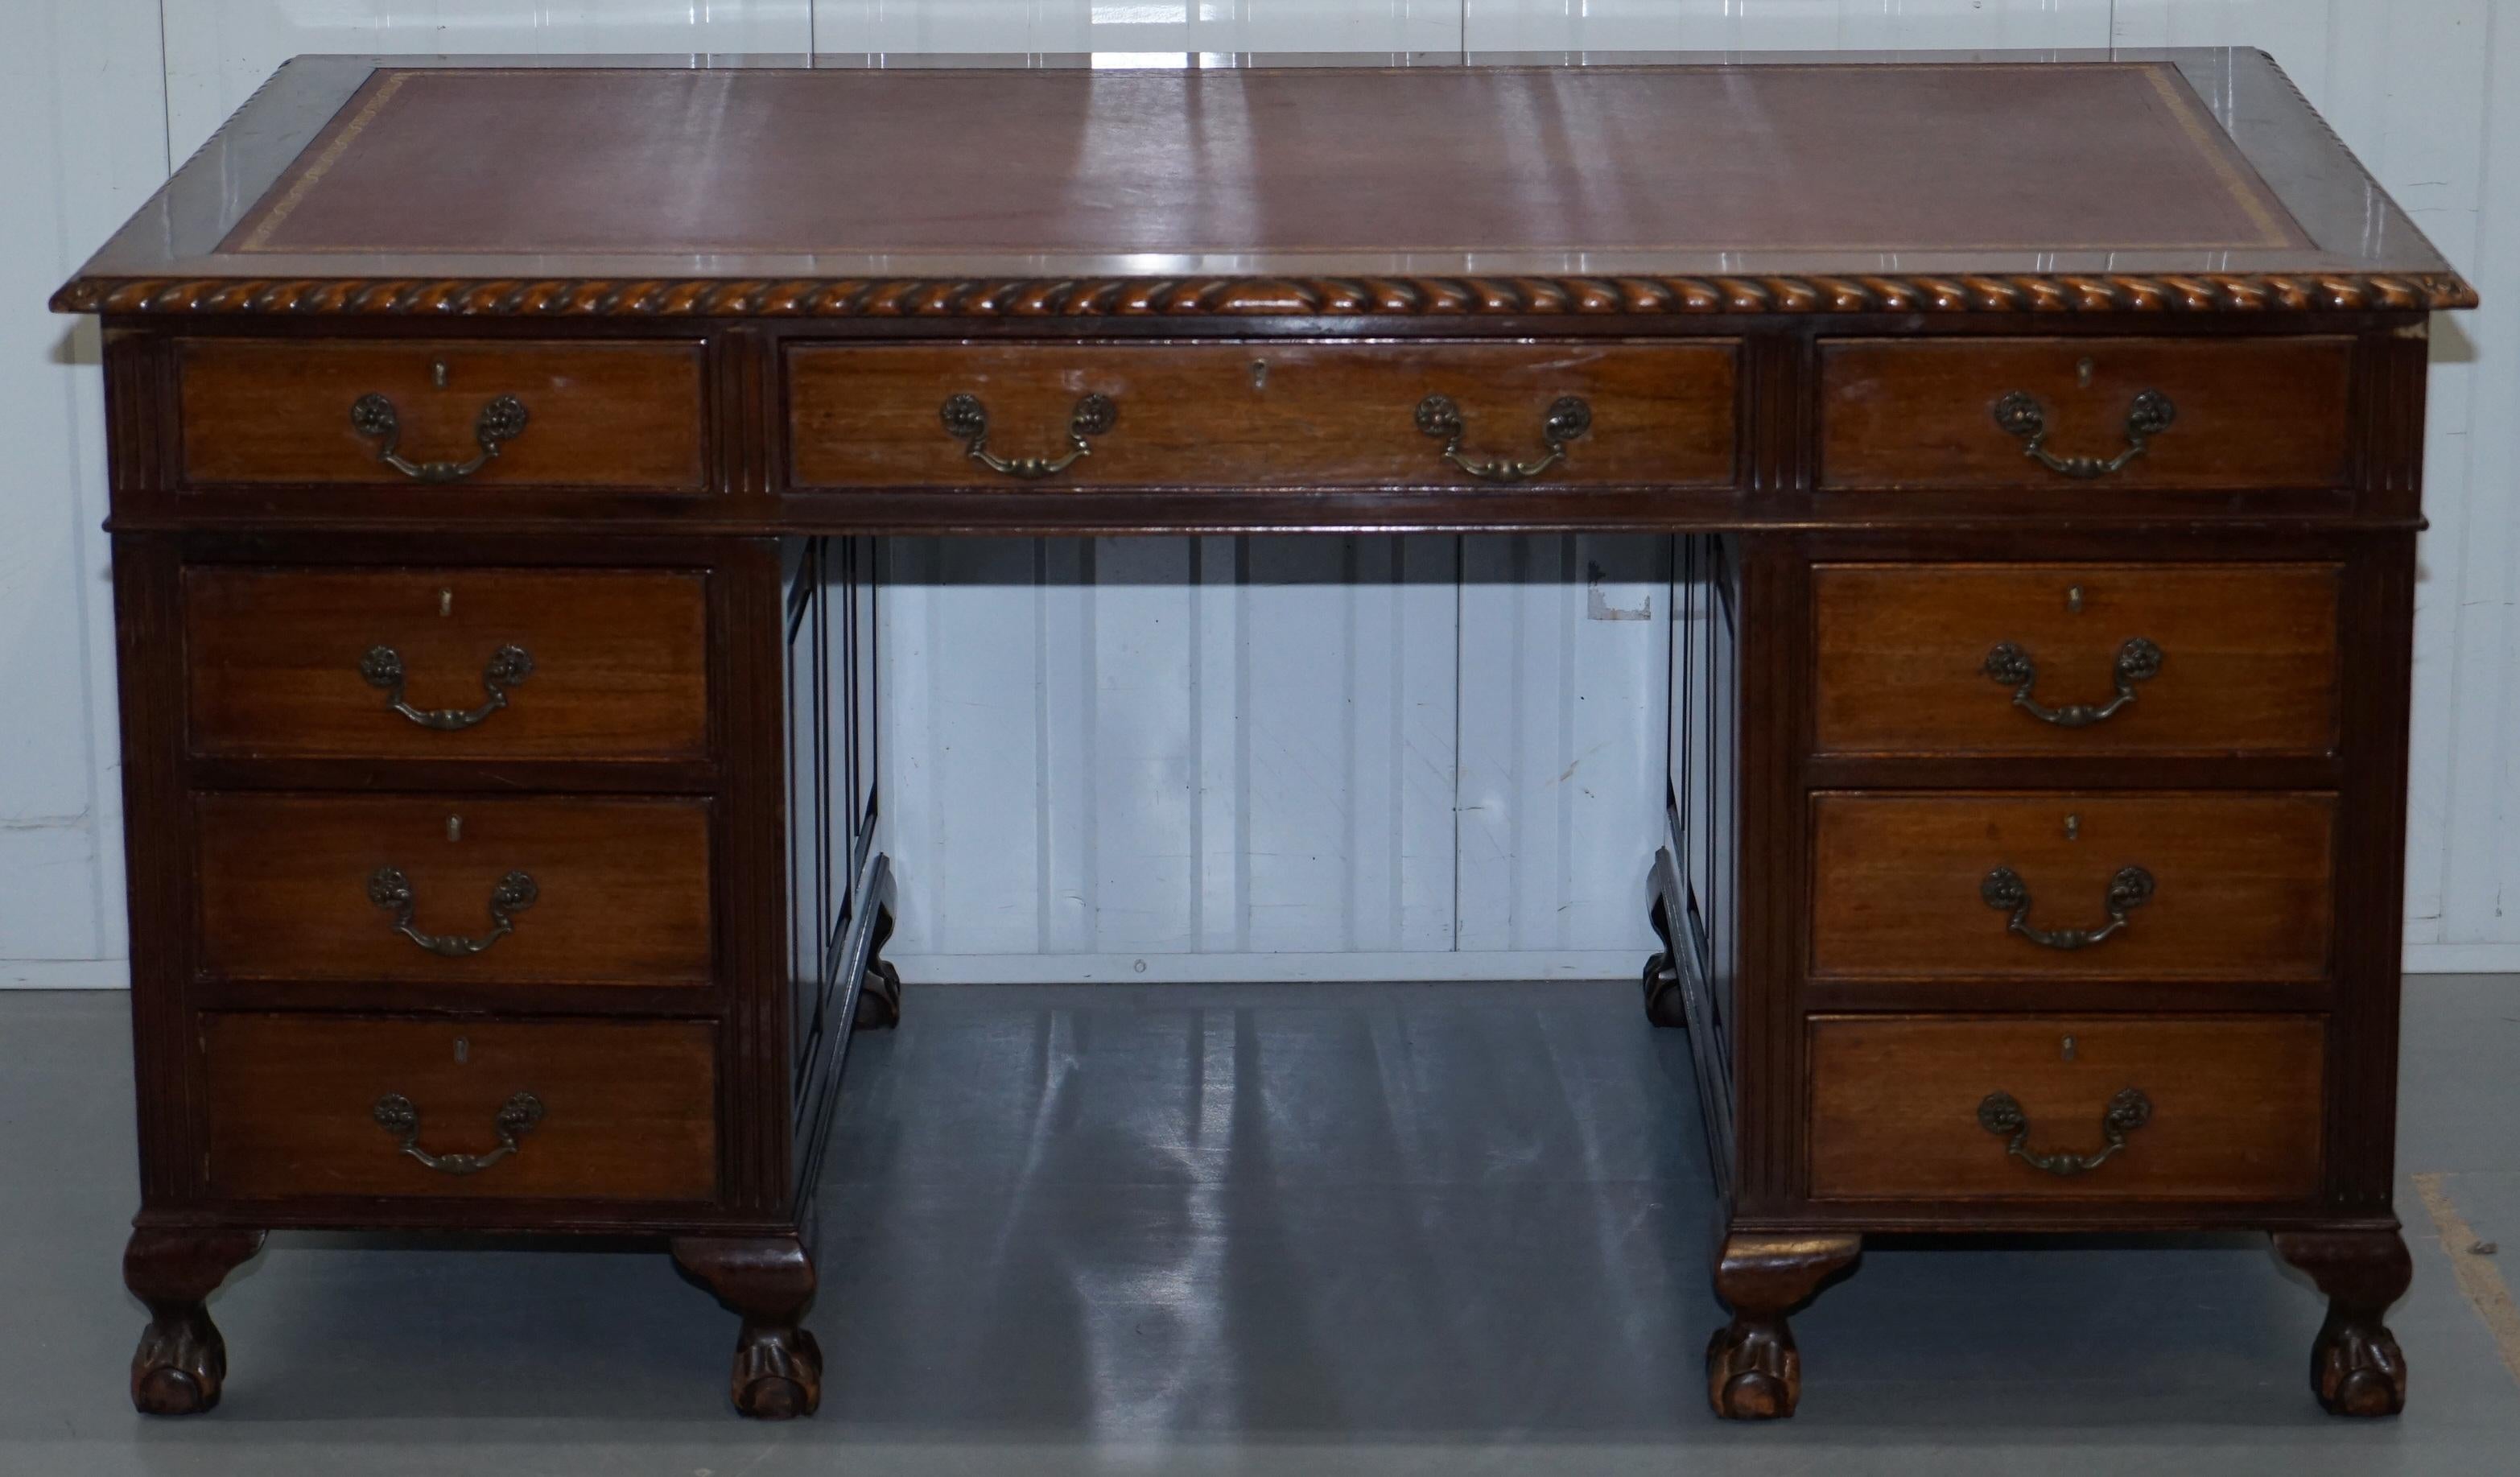 We are delighted to offer for sale this lovely Claw & Ball foot twin pedestal partner desk with oxblood leather top and panelled mahogany frame,

A very well made piece, the desk is panelled mahogany all around in the Georgian manor, it has hand